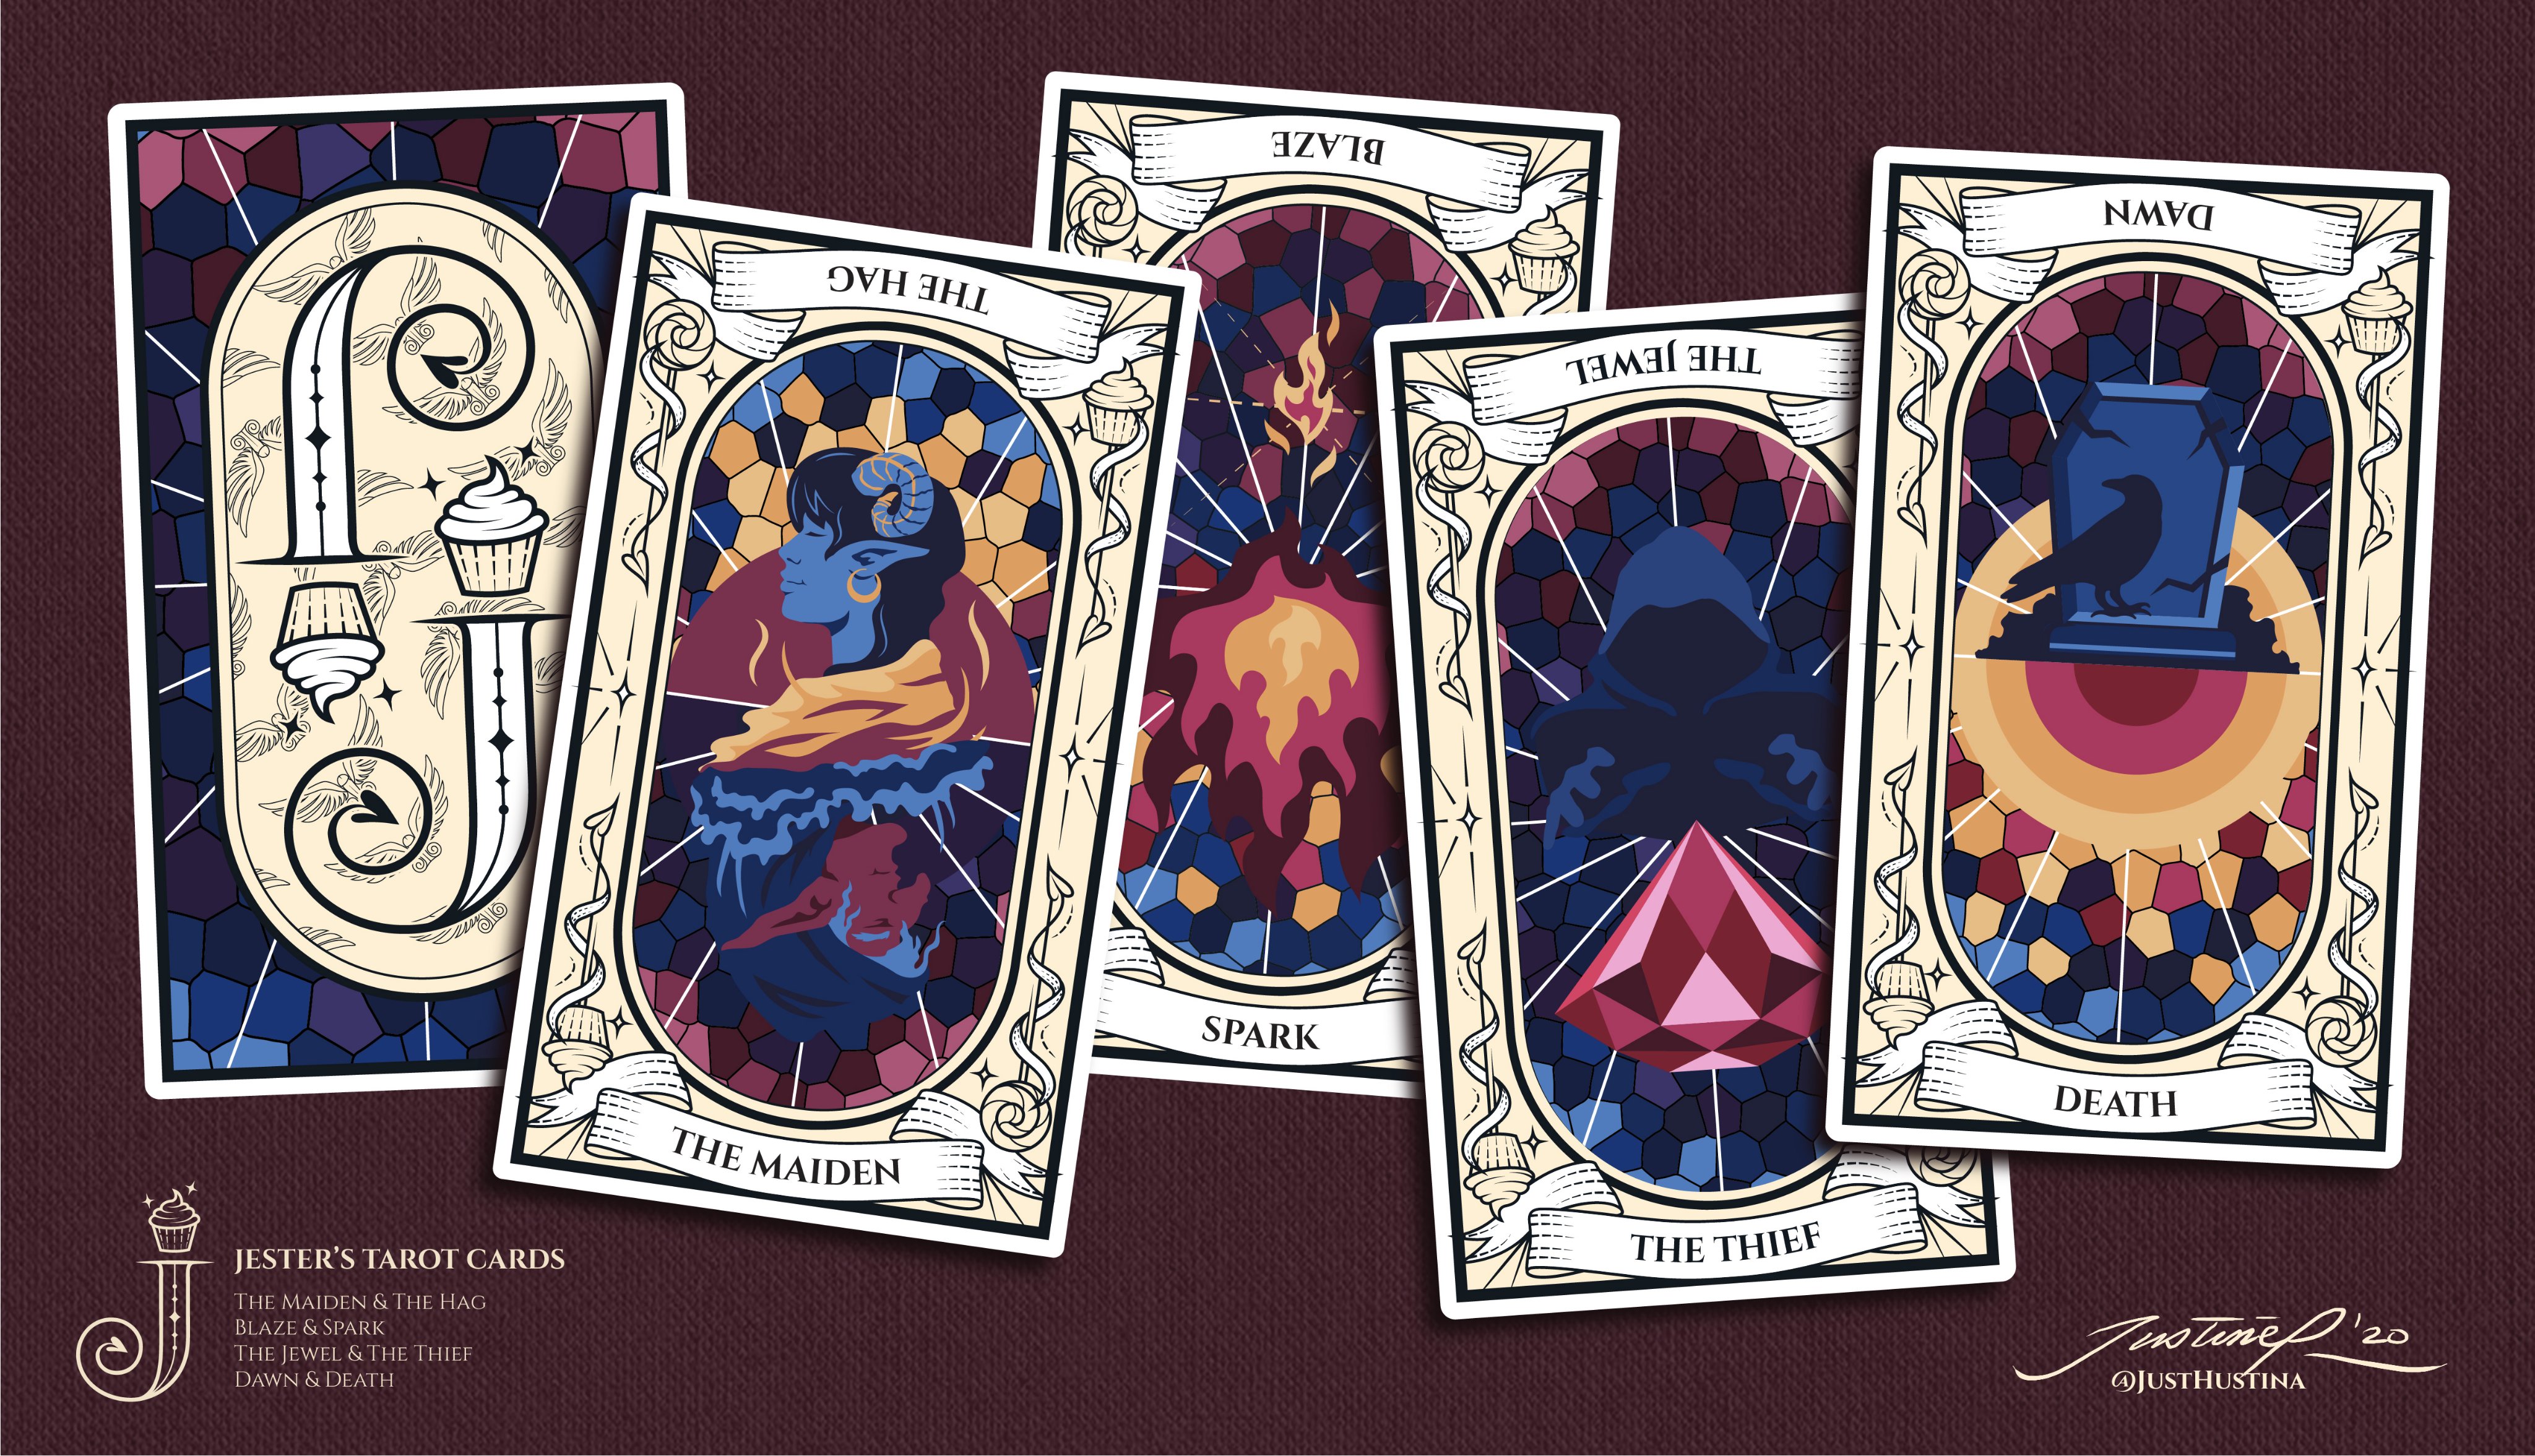 Best Tarot Card Reading Sites of 2022: Where to Get Free Tarot Readings for Love & Guidance Online